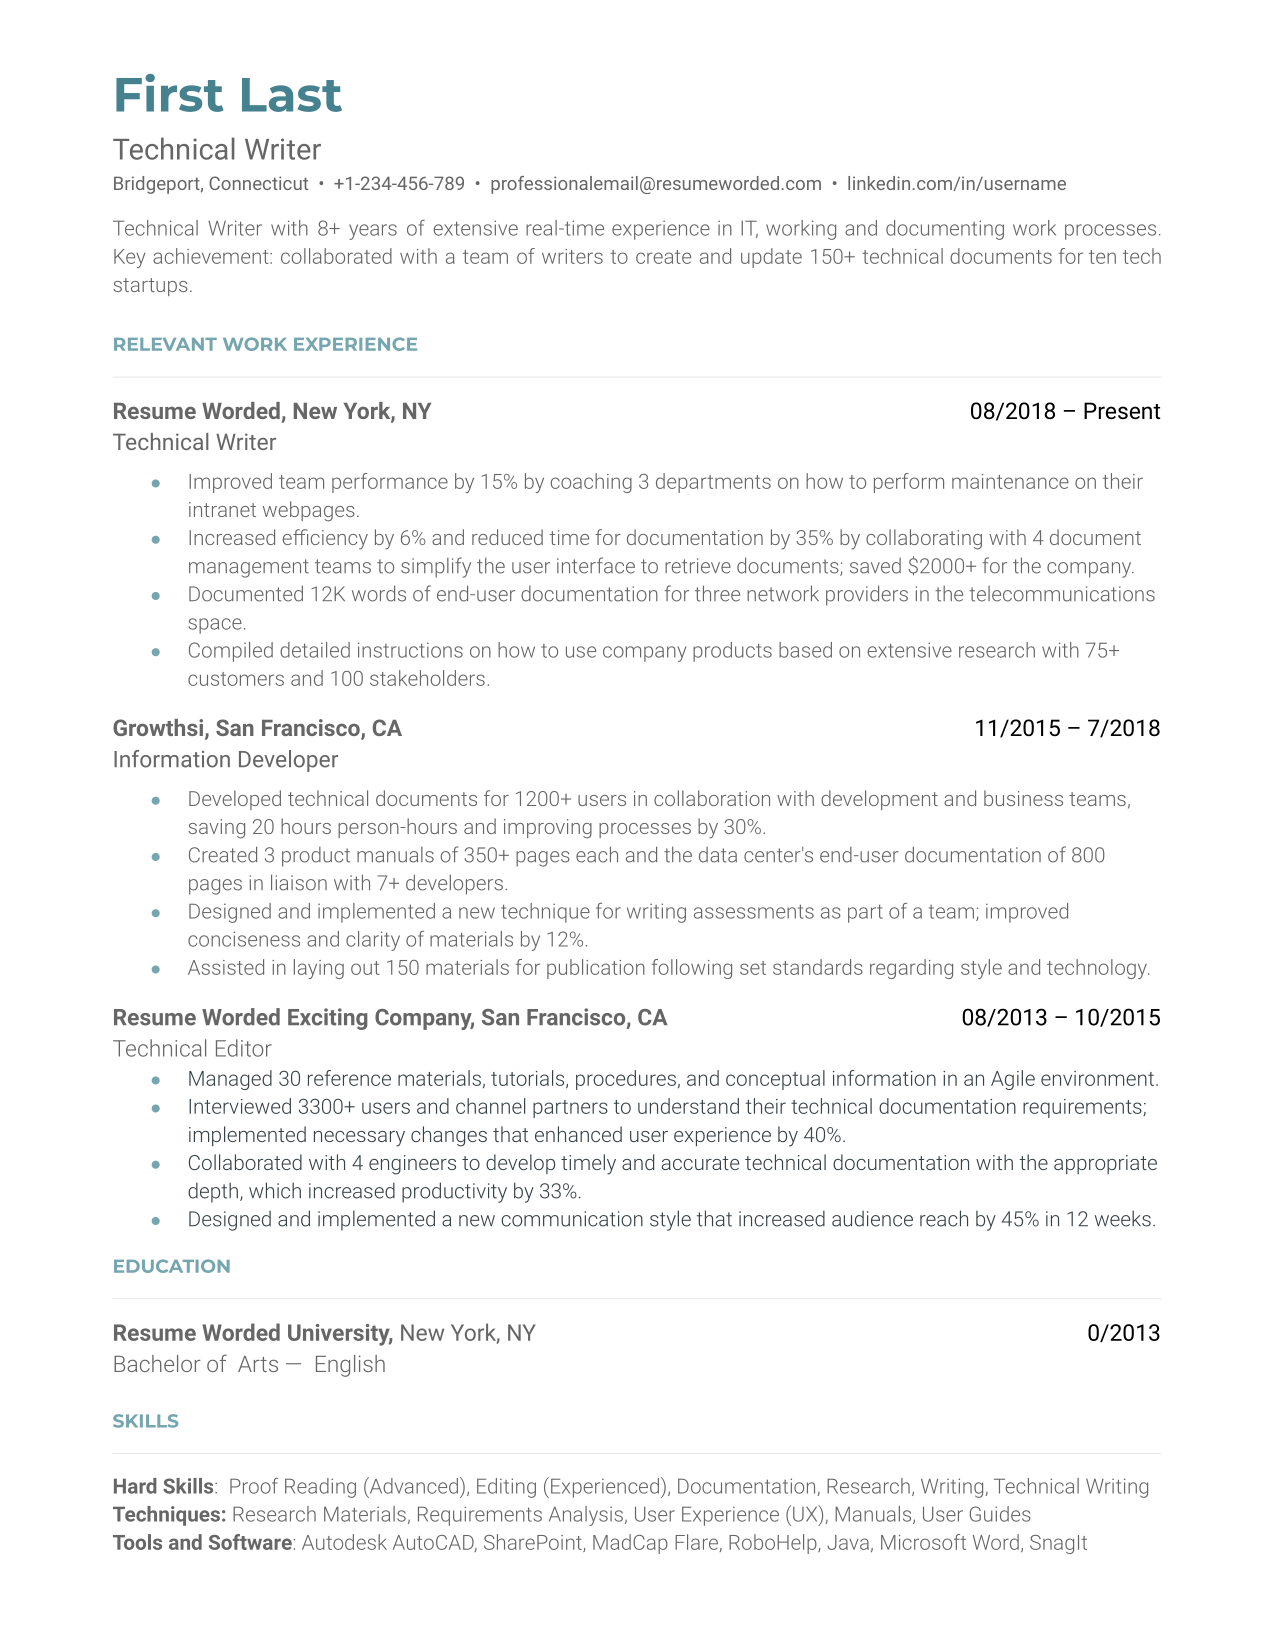 A technical writer resume sample that highlights the applicant’s experience and qualifications.